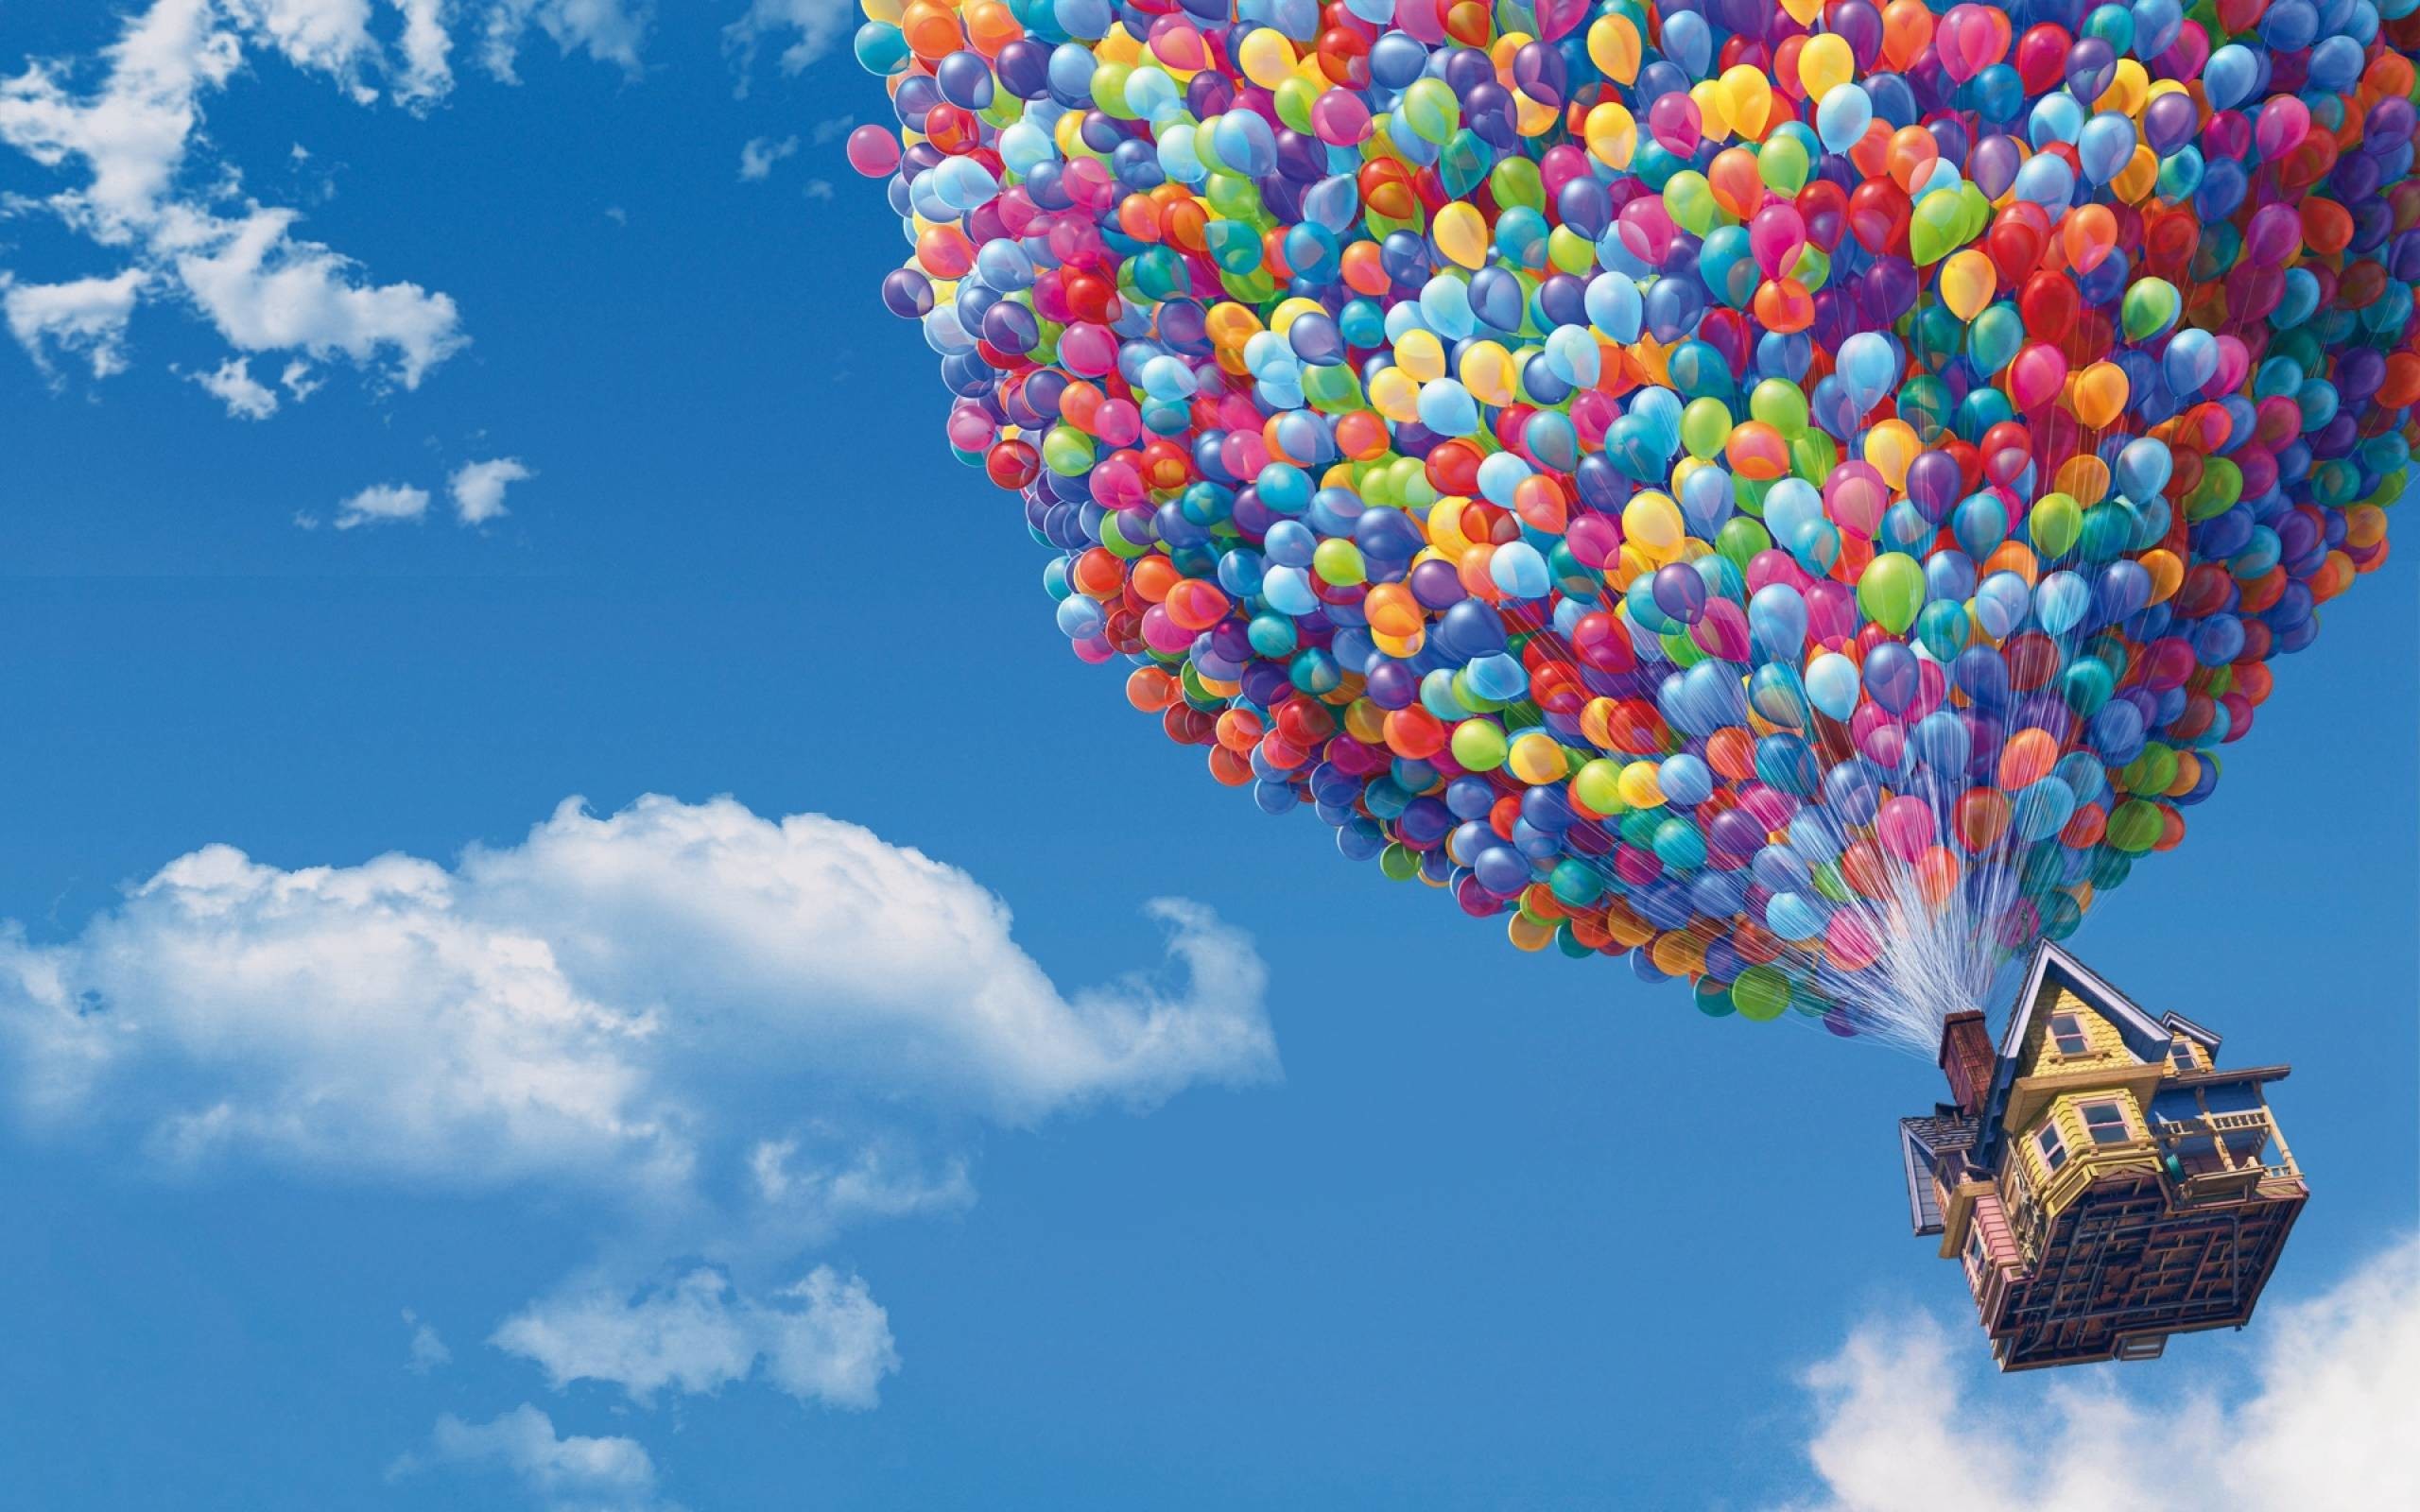 2560x1600 Most Downloaded Pixar Wallpapers - Full HD wallpaper search